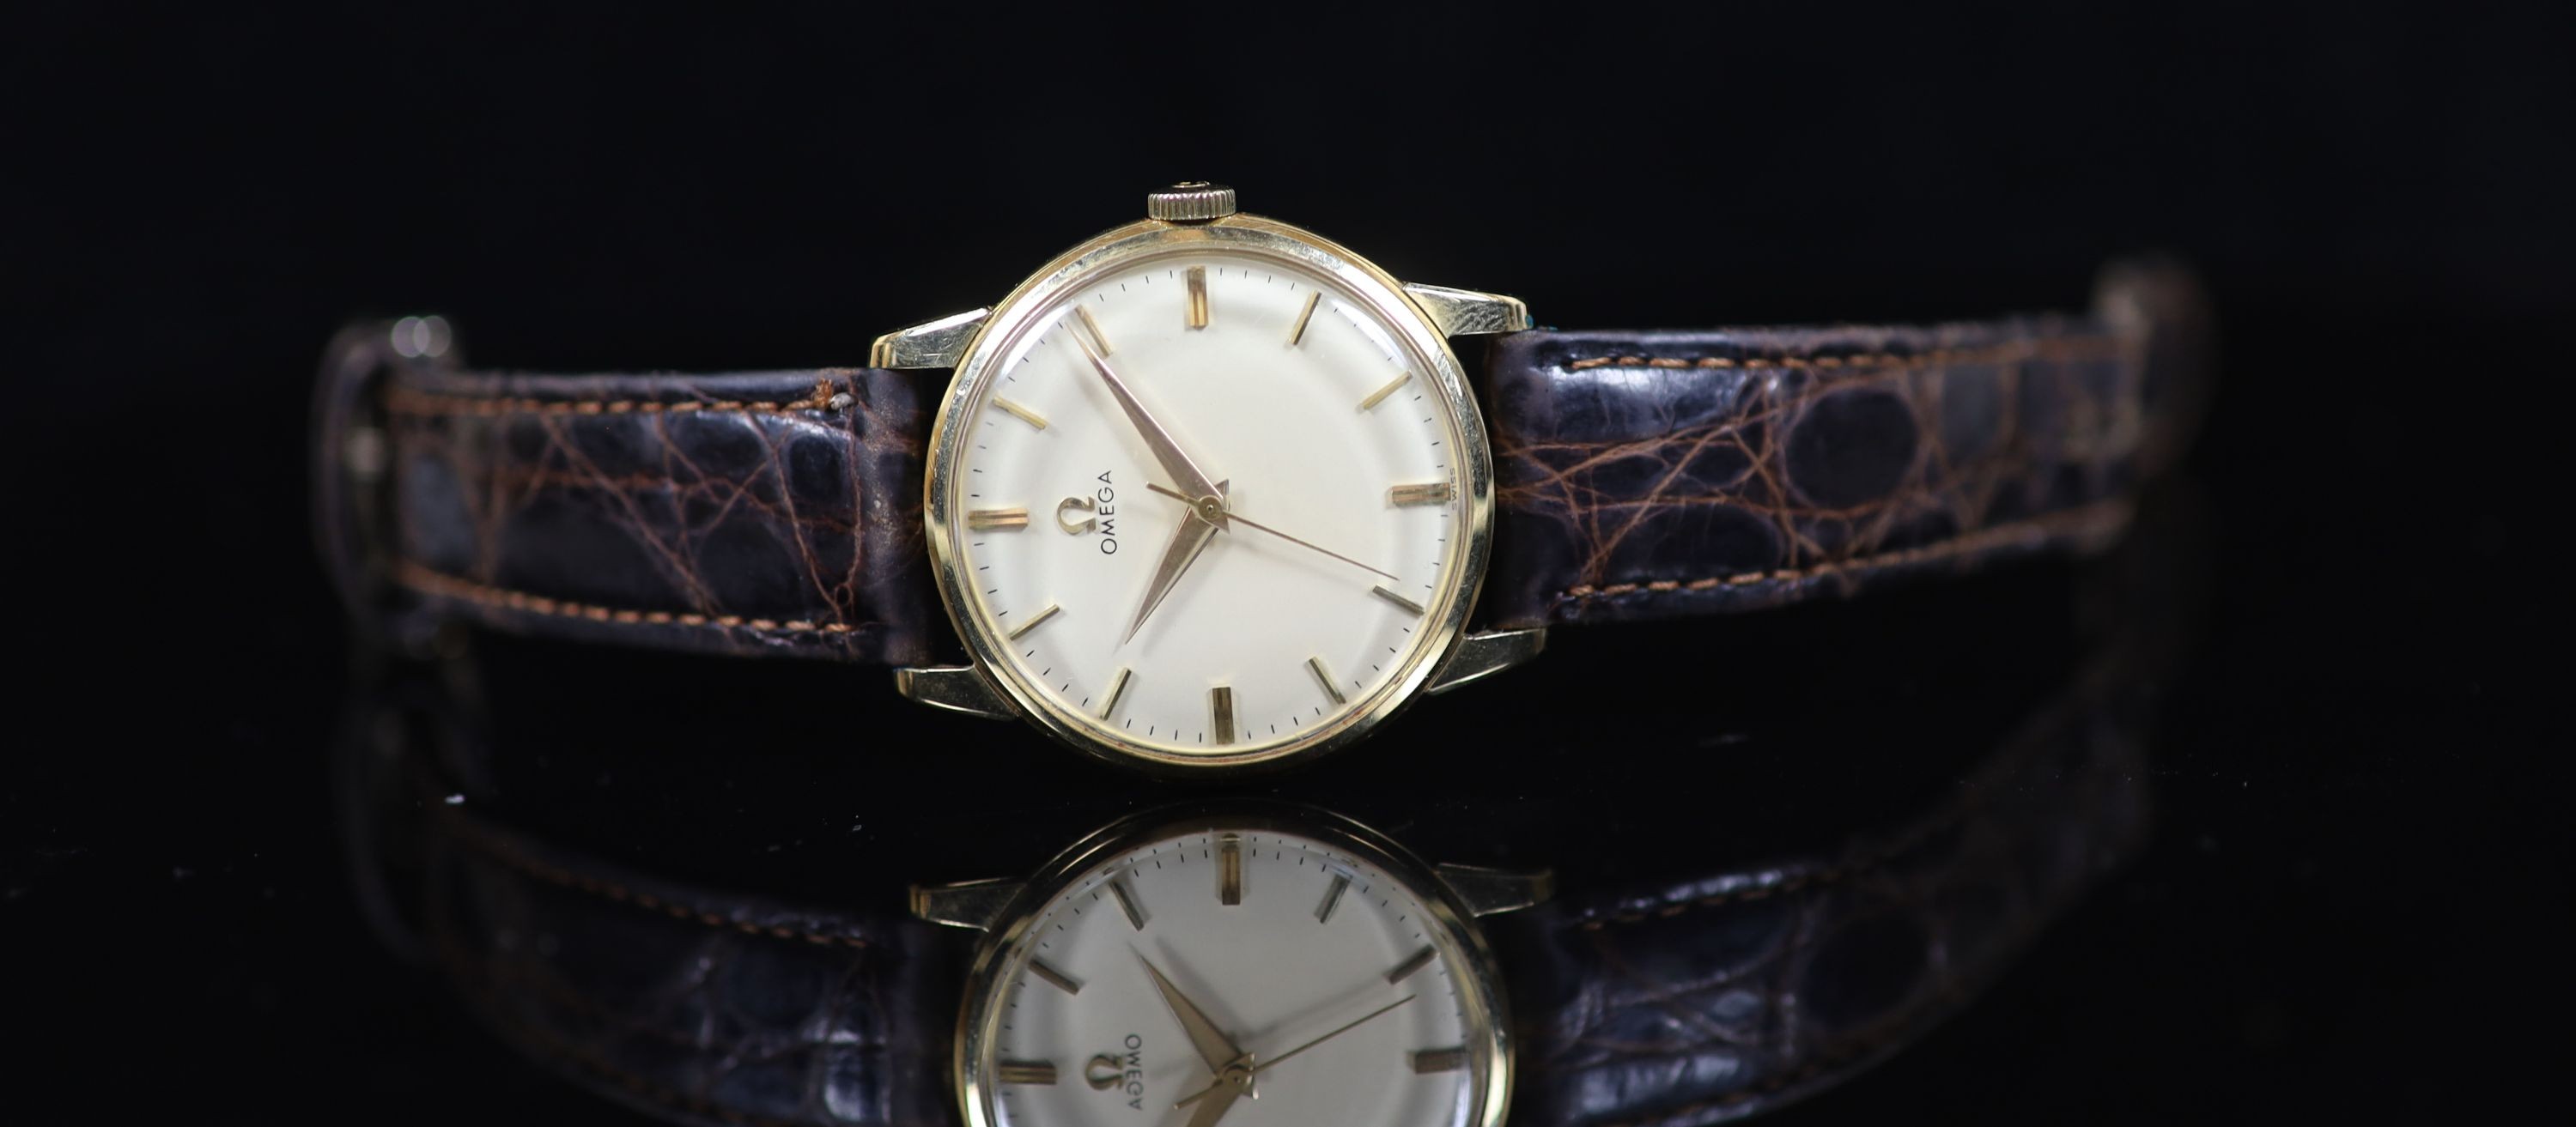 A gentleman's late 1950's 14ct gold Omega manual wind wrist watch